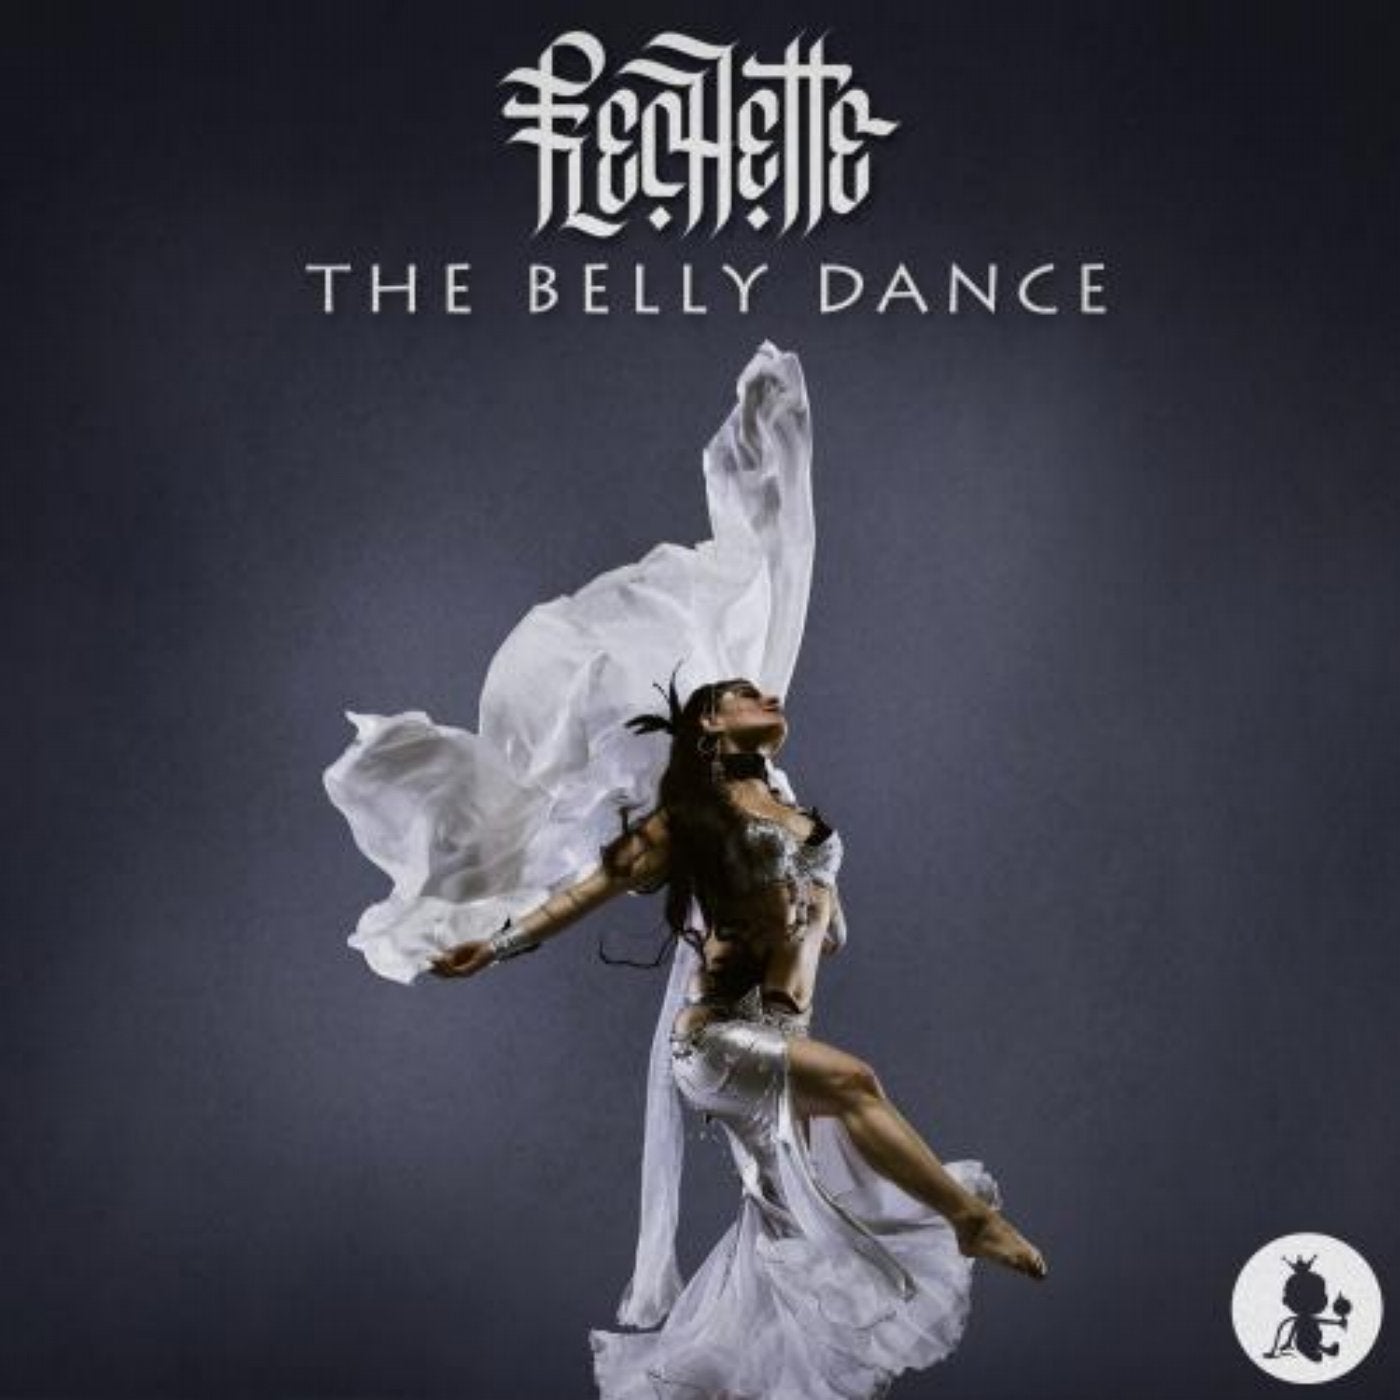 The Belly Dance